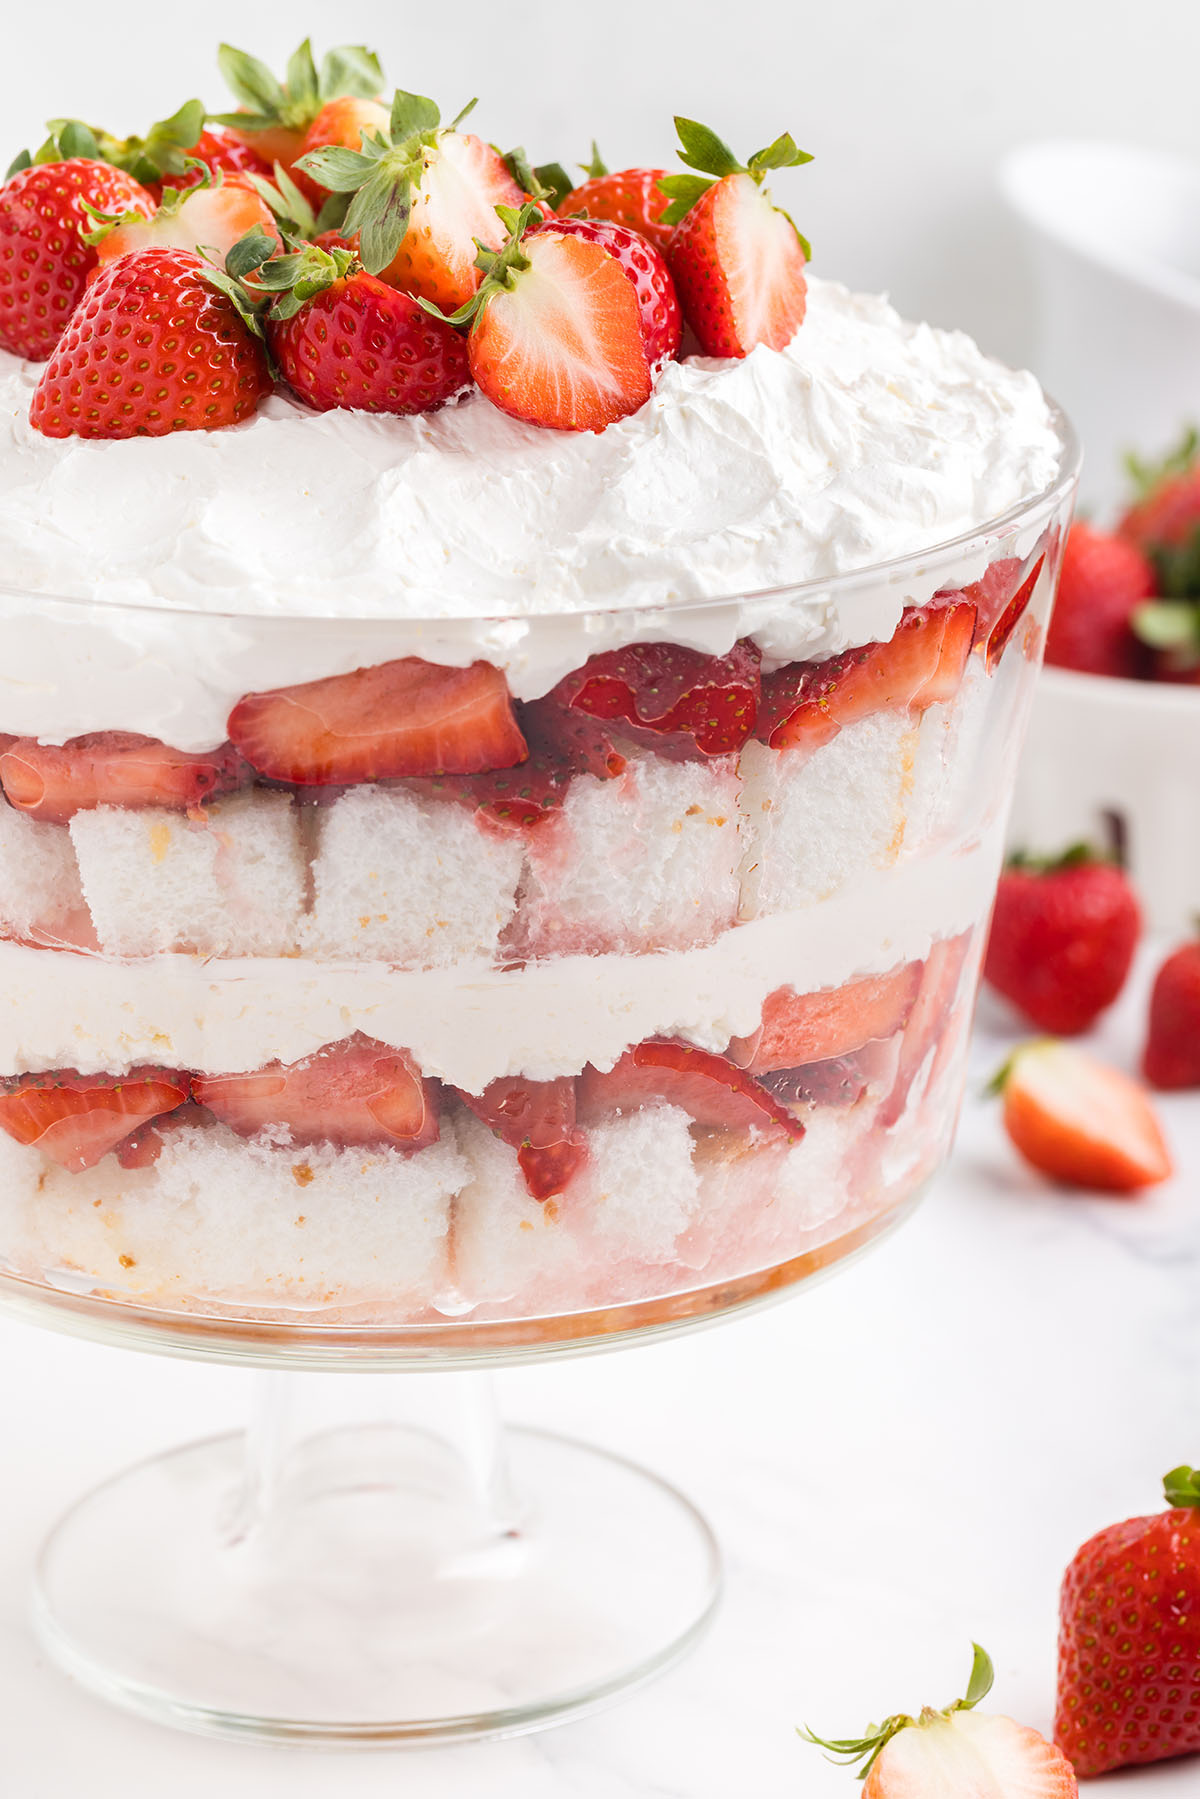 strawberry shortcake trifle with layers of cake, strawberries and cream cheese.